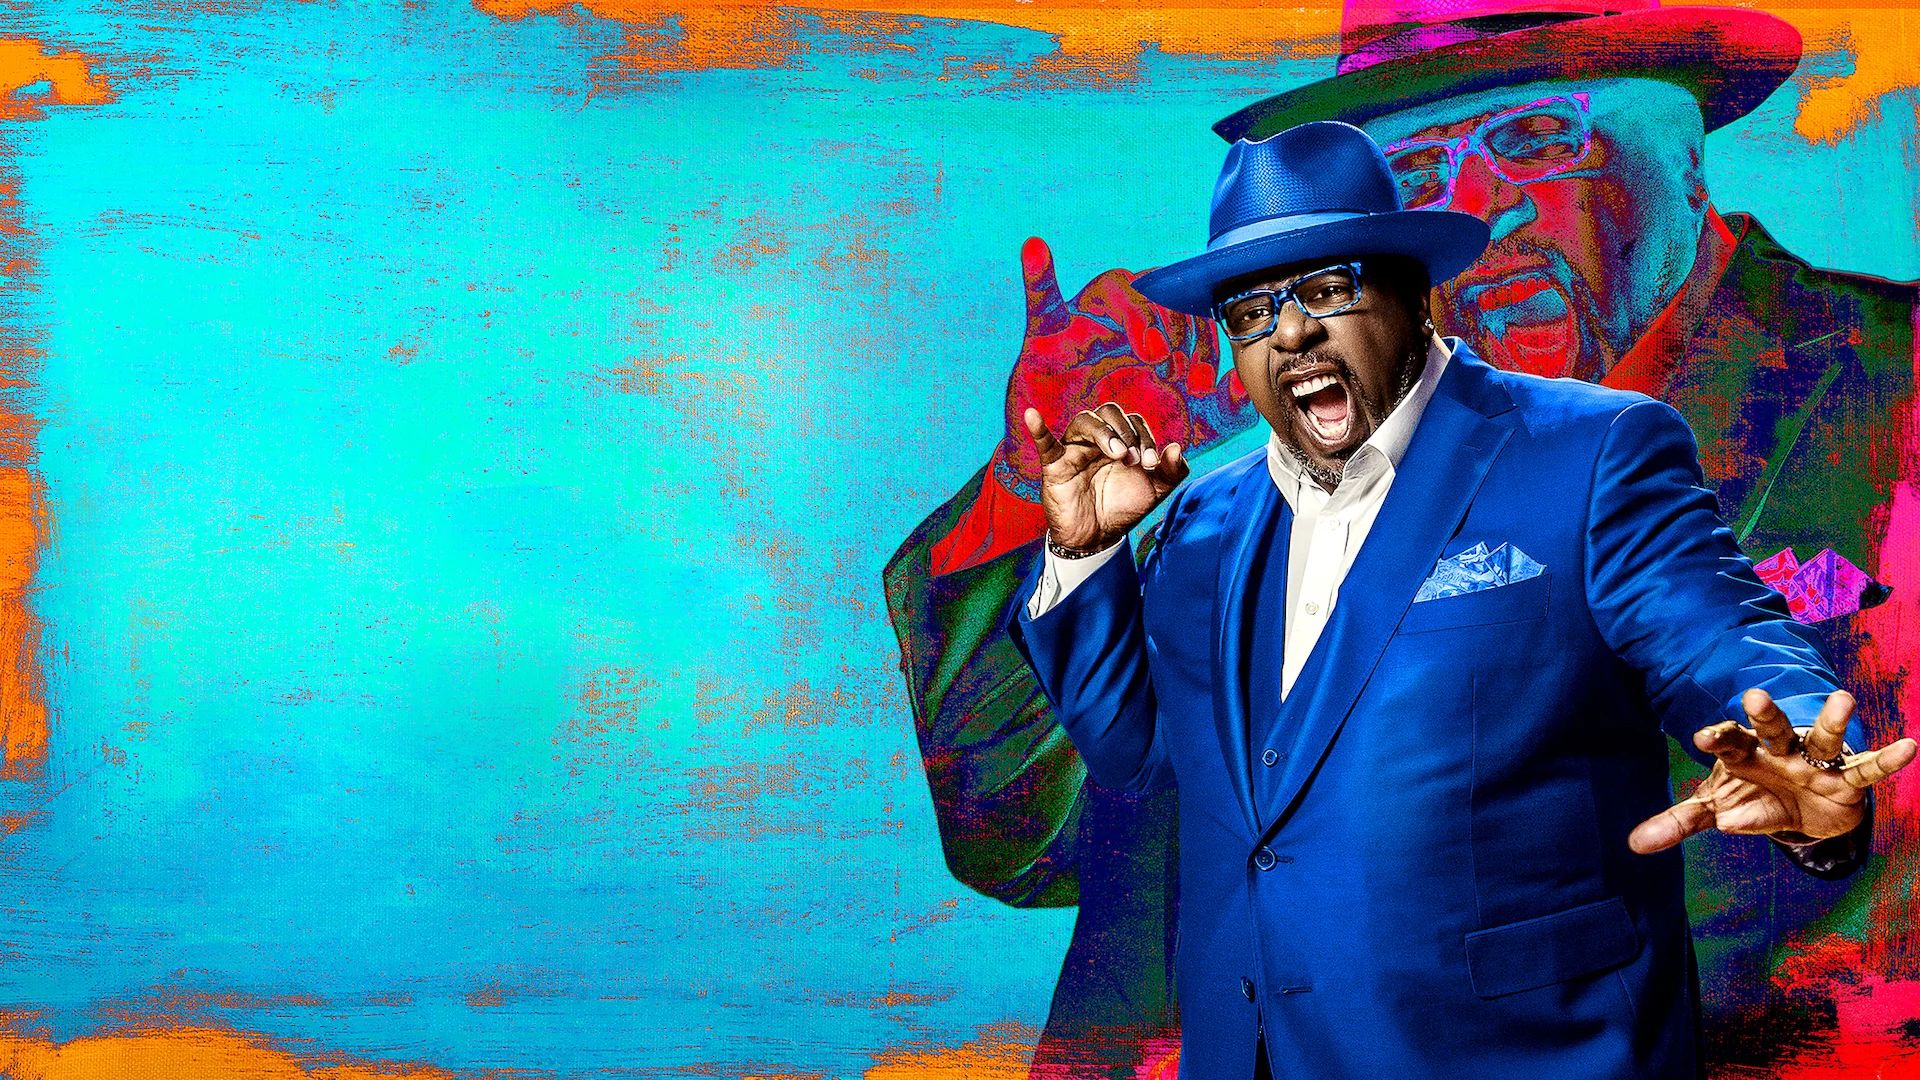 Cedric the Entertainer: Live from the Ville Backdrop